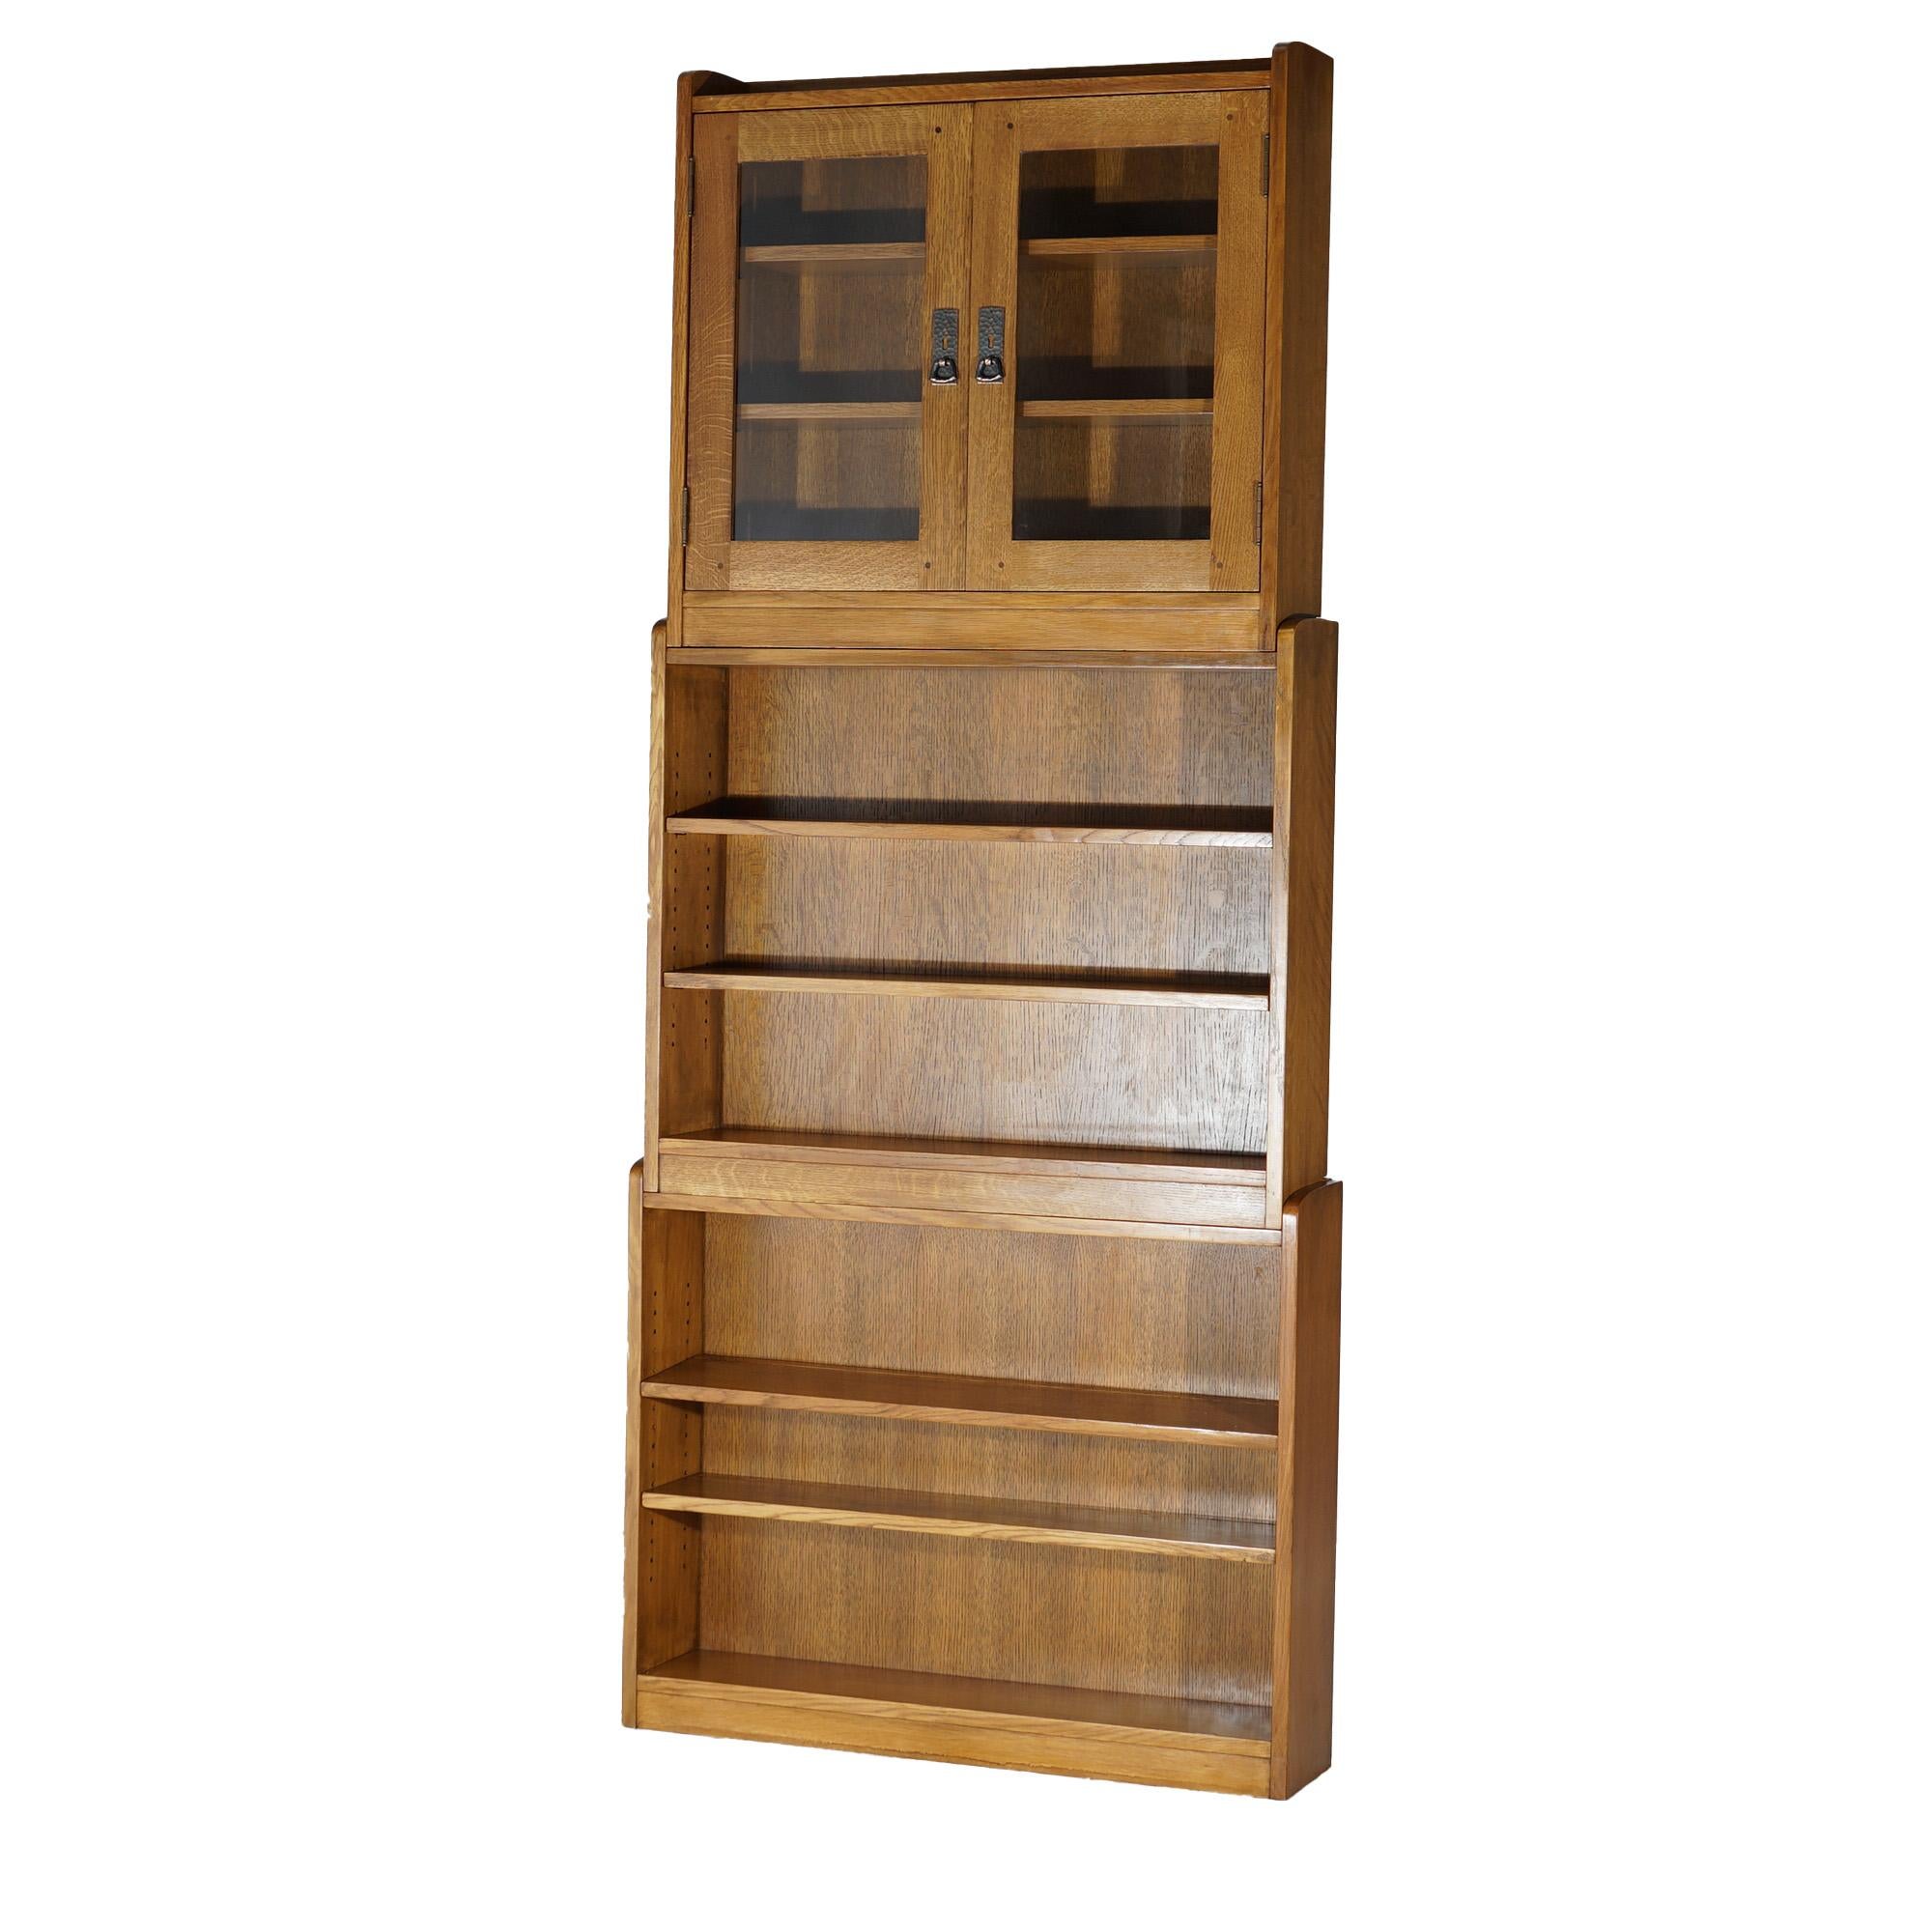 An Arts and Crafts style bookcase in the manner of Stickley offers oak construction in tiered modular form with three sections including two with open shelving and the top enclosed and having double glass doors; this item is designed to be used as a